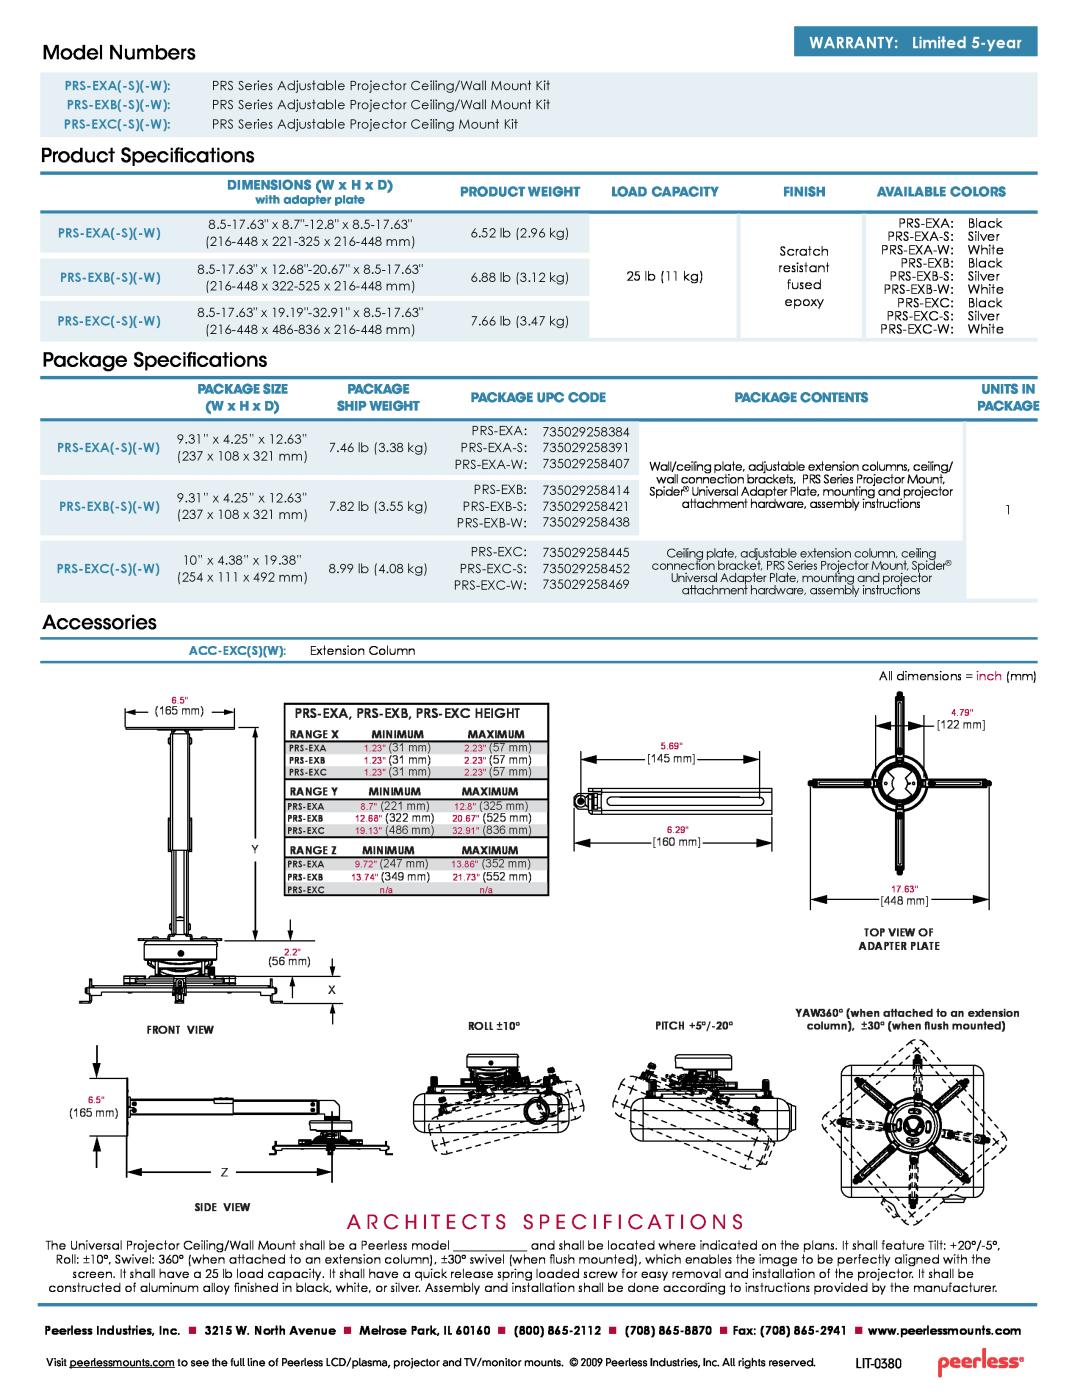 Peerless Industries PRS-EXC(-S)(-W) manual Model Numbers, Product Specifications, Package Specifications, Accessories 